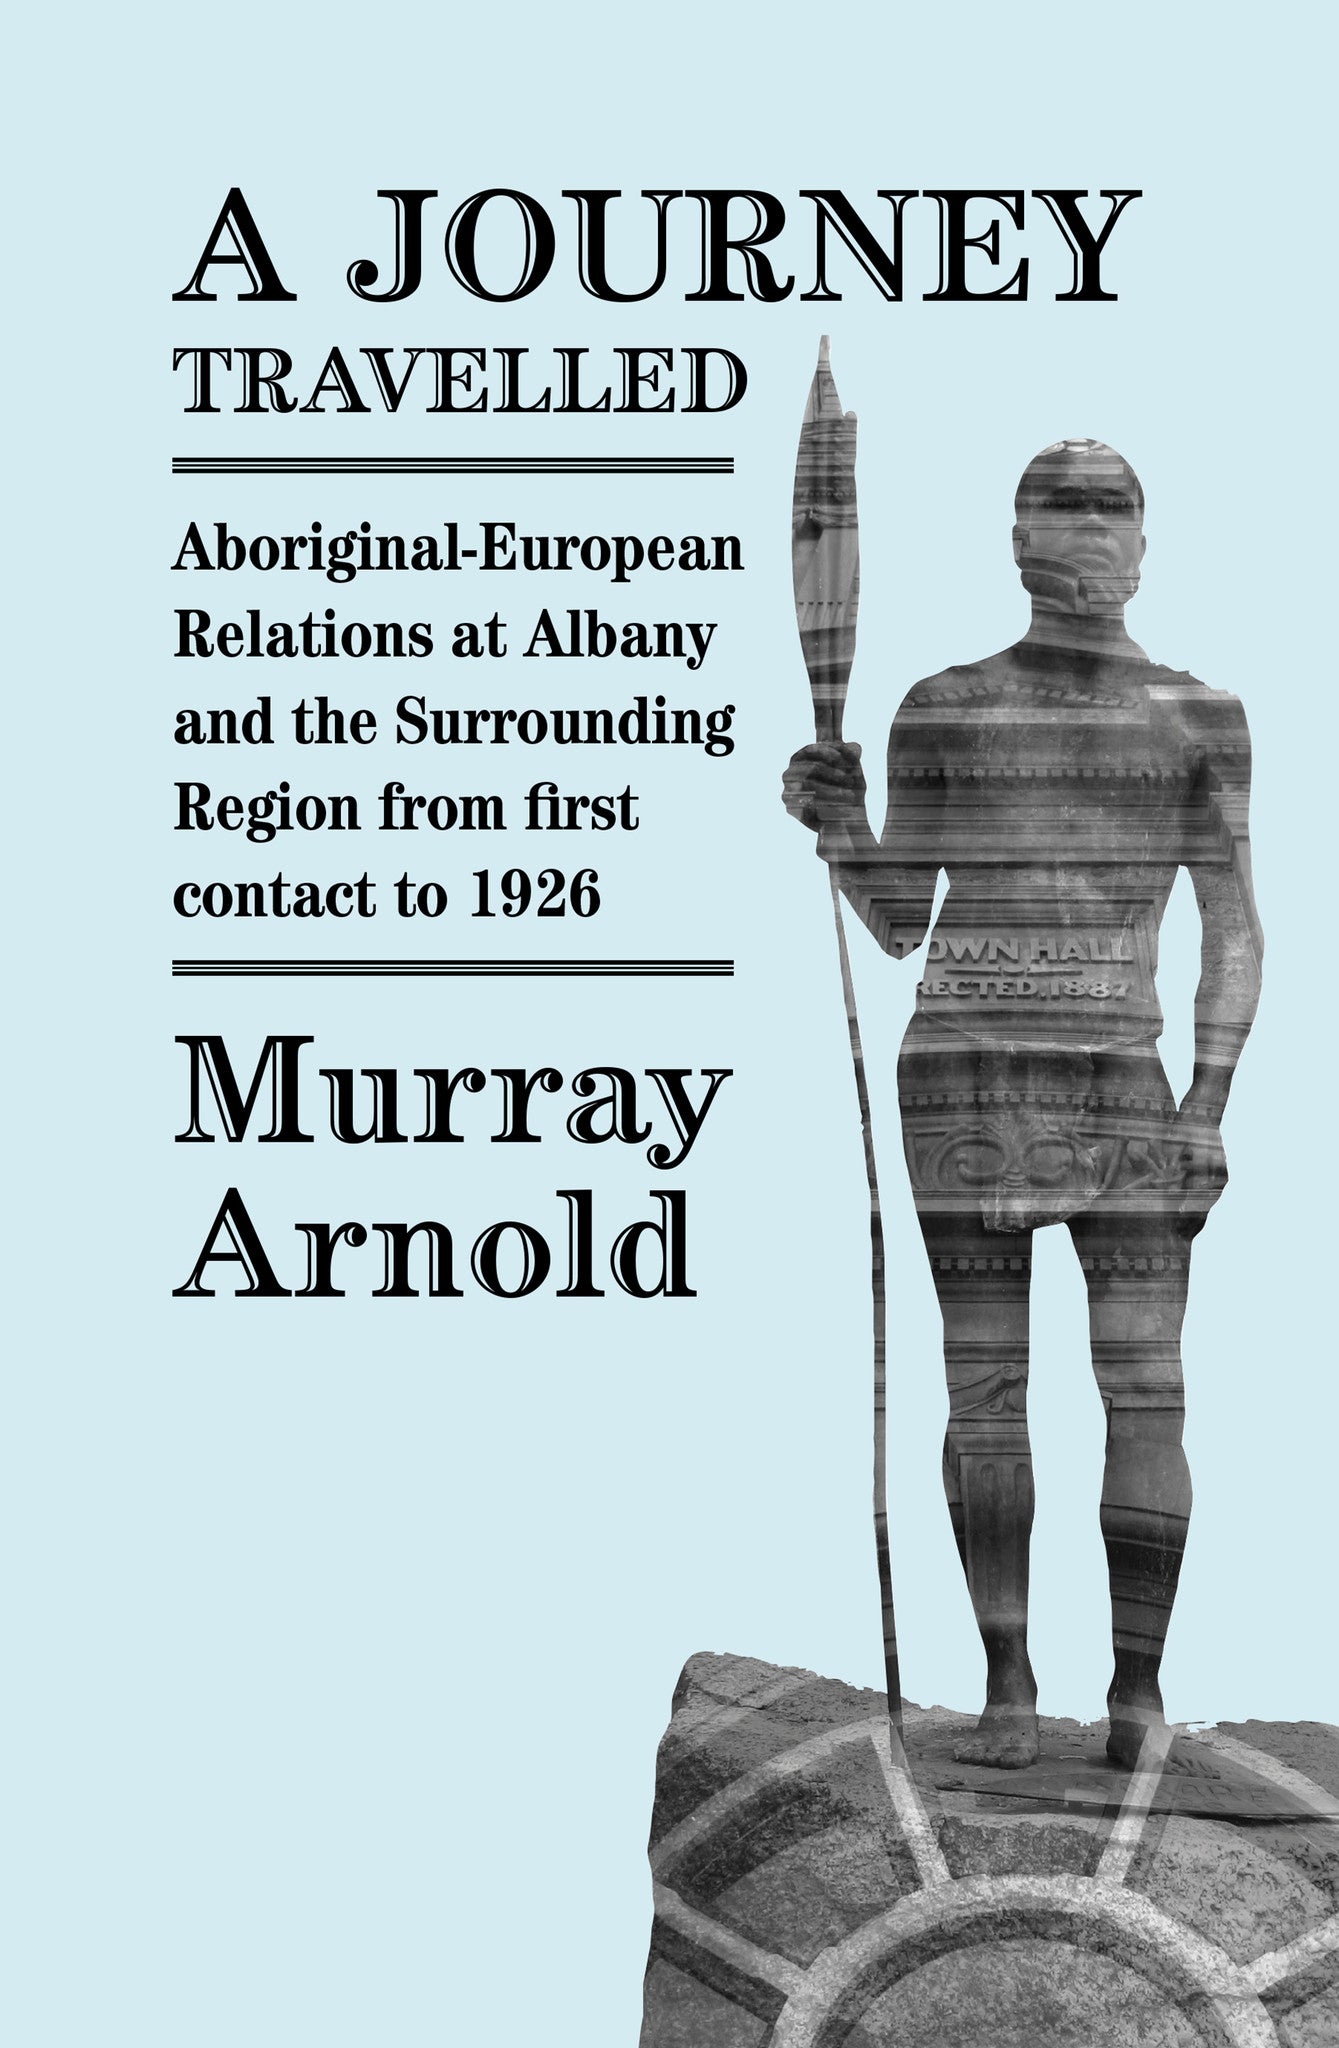 A Journey Travelled: Aboriginal-European relations at Albany and surrounding regions from first colonial contact to 1926